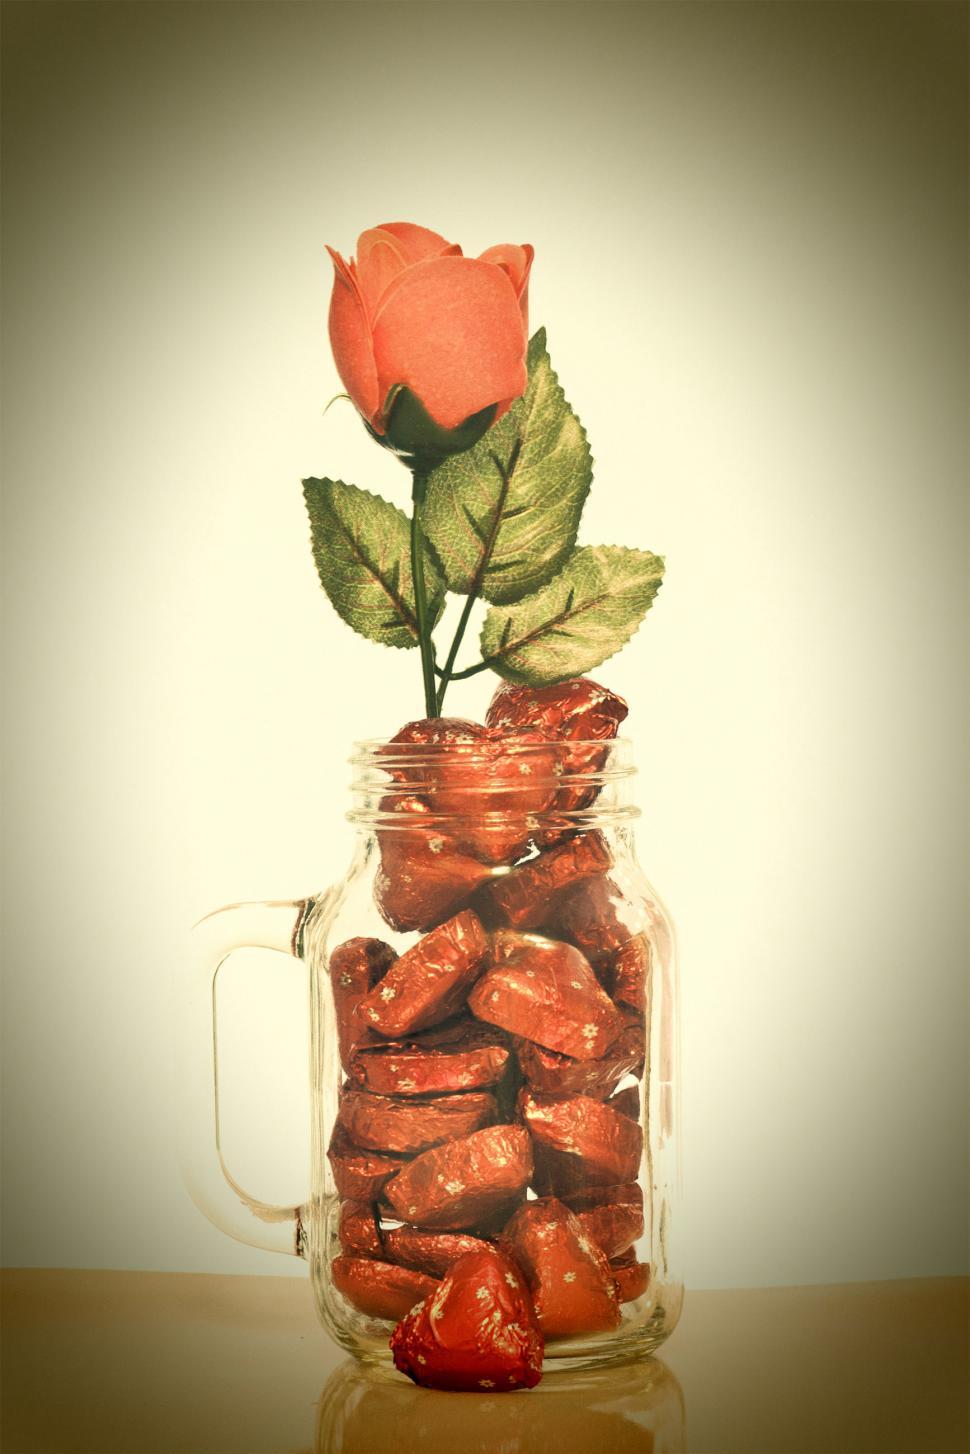 Free Image of Rose and candy in a jar 